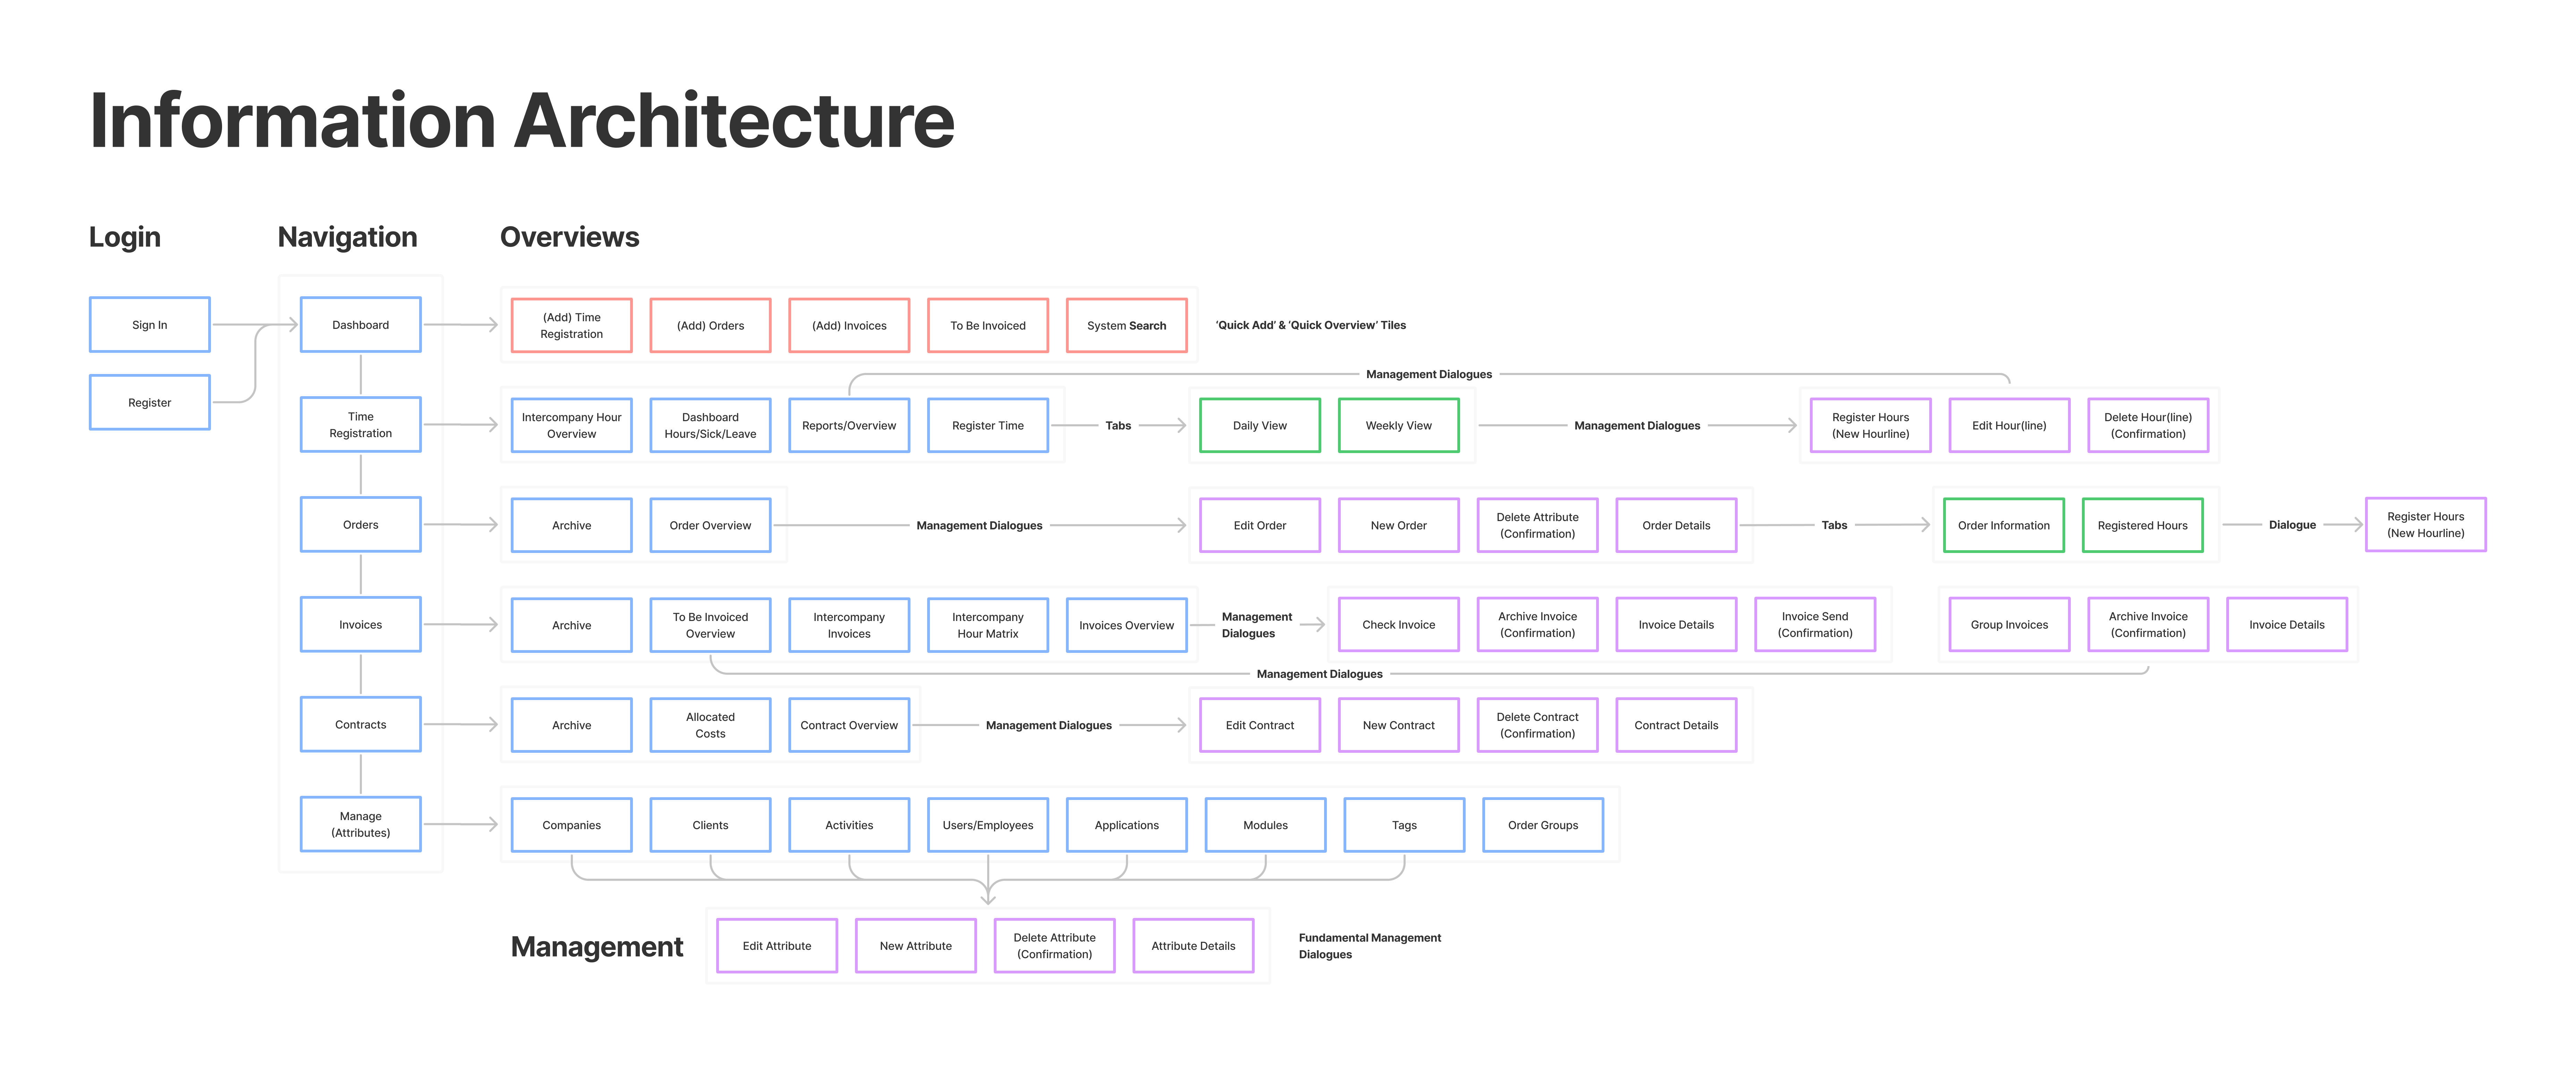 The information architecture. Laying out all the page and navigational connections of the solution.